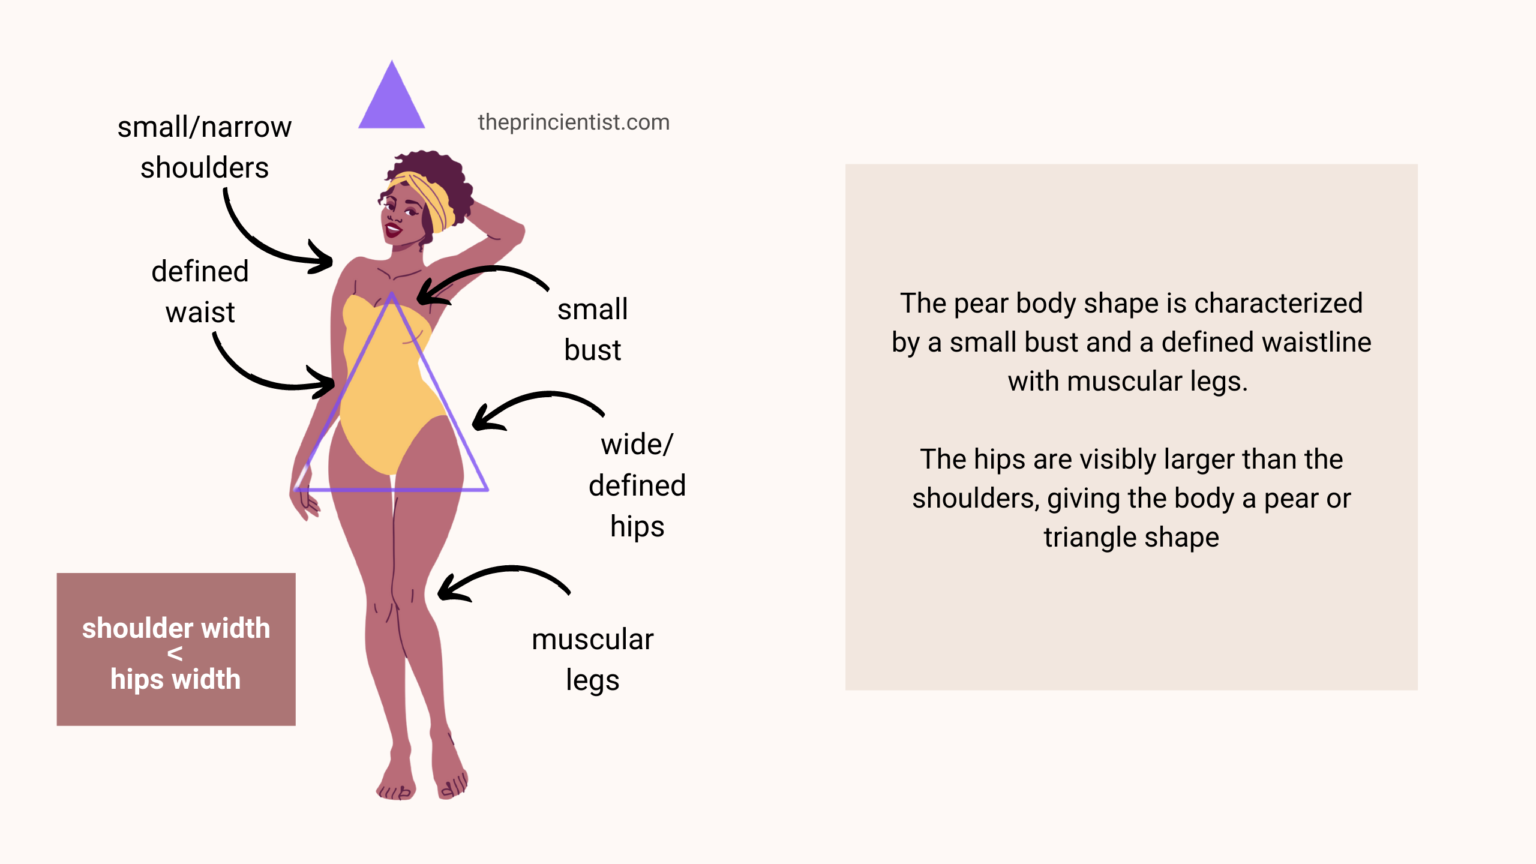 How To Dress The Apple Shaped Body – Complete Guide - The Princientist